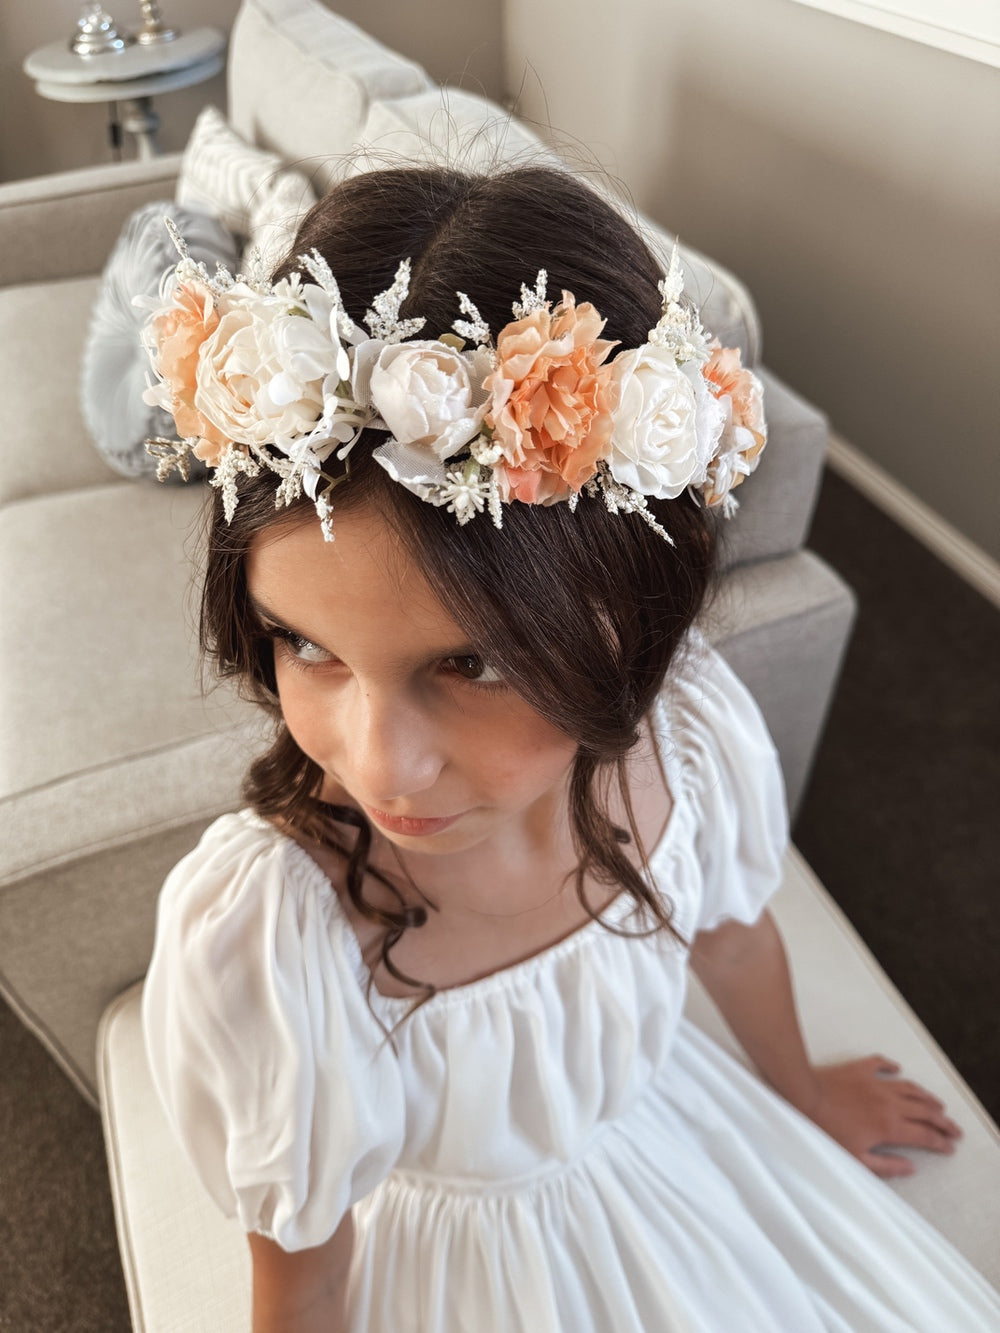 Flora Girls Flower Crown - All Products